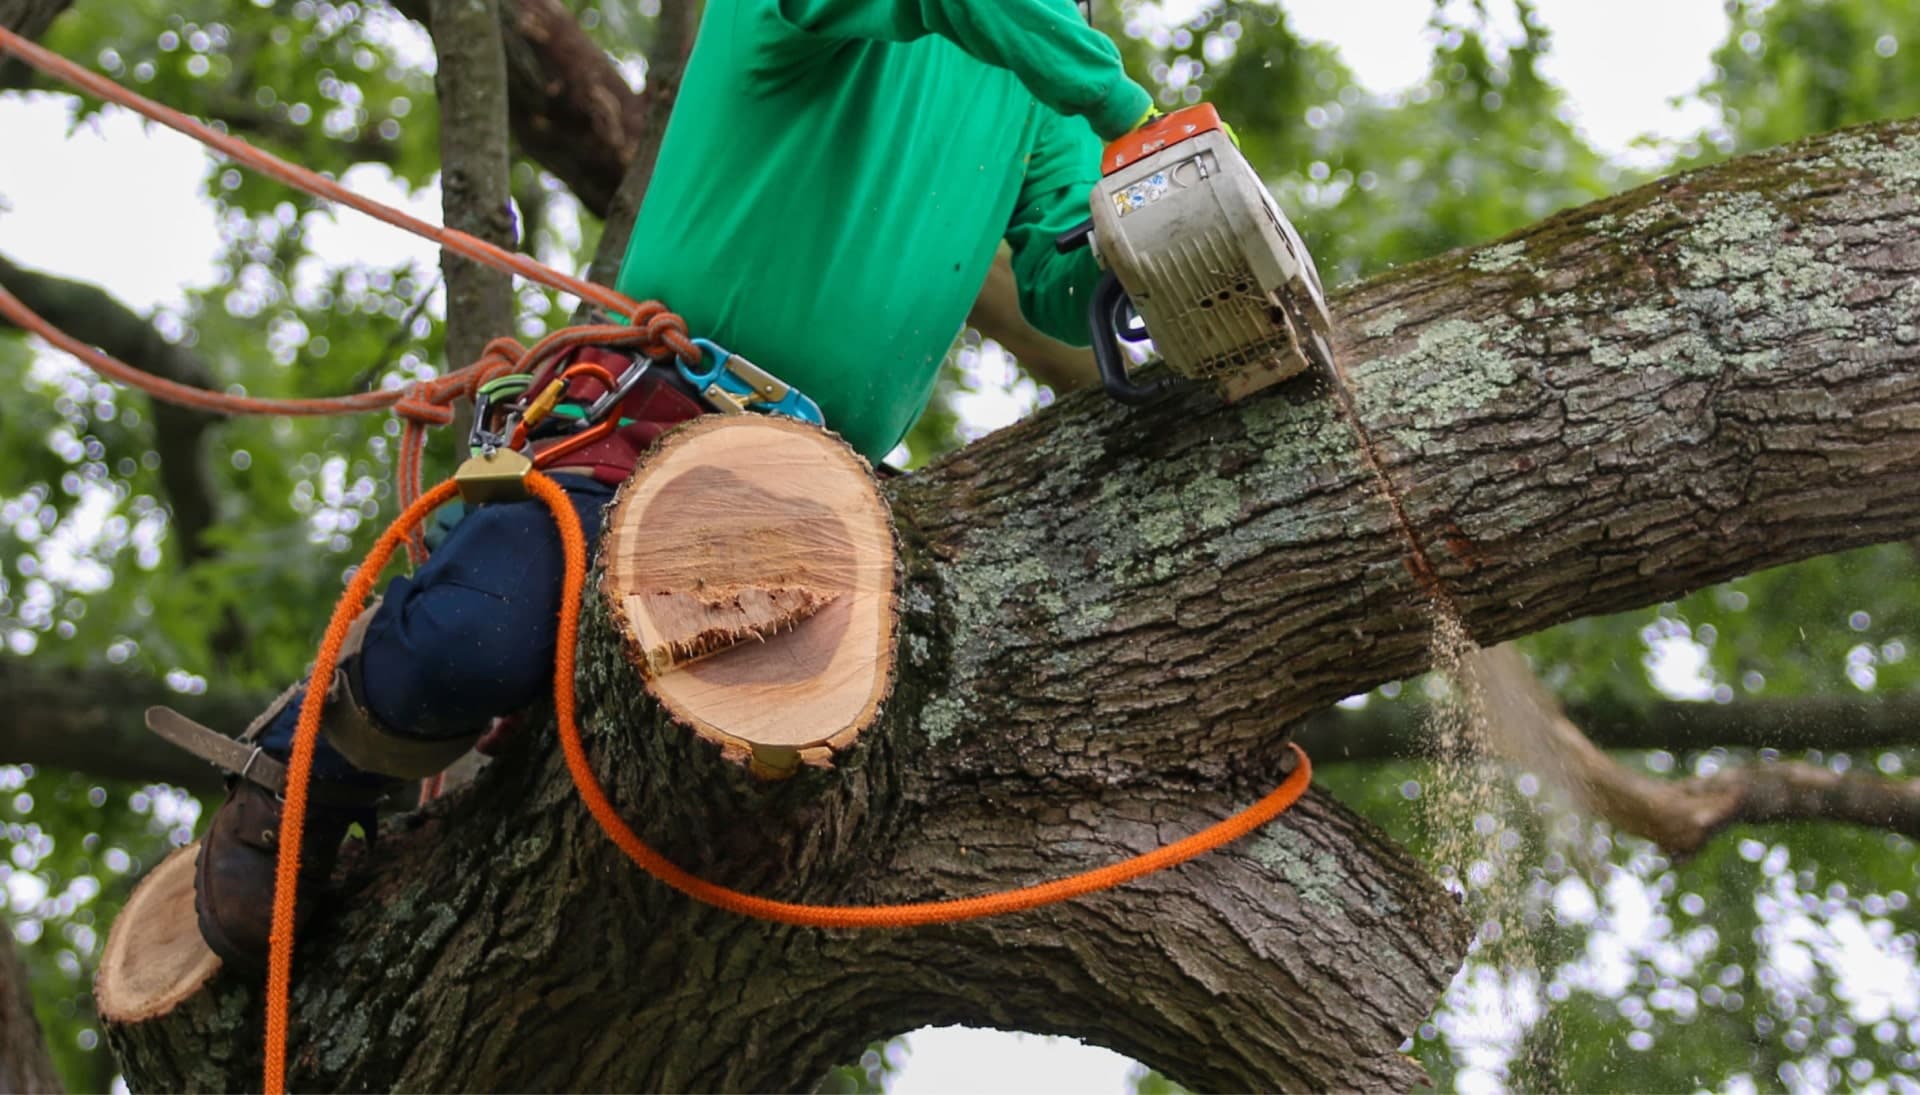 Shed your worries away with best tree removal in Corvallis